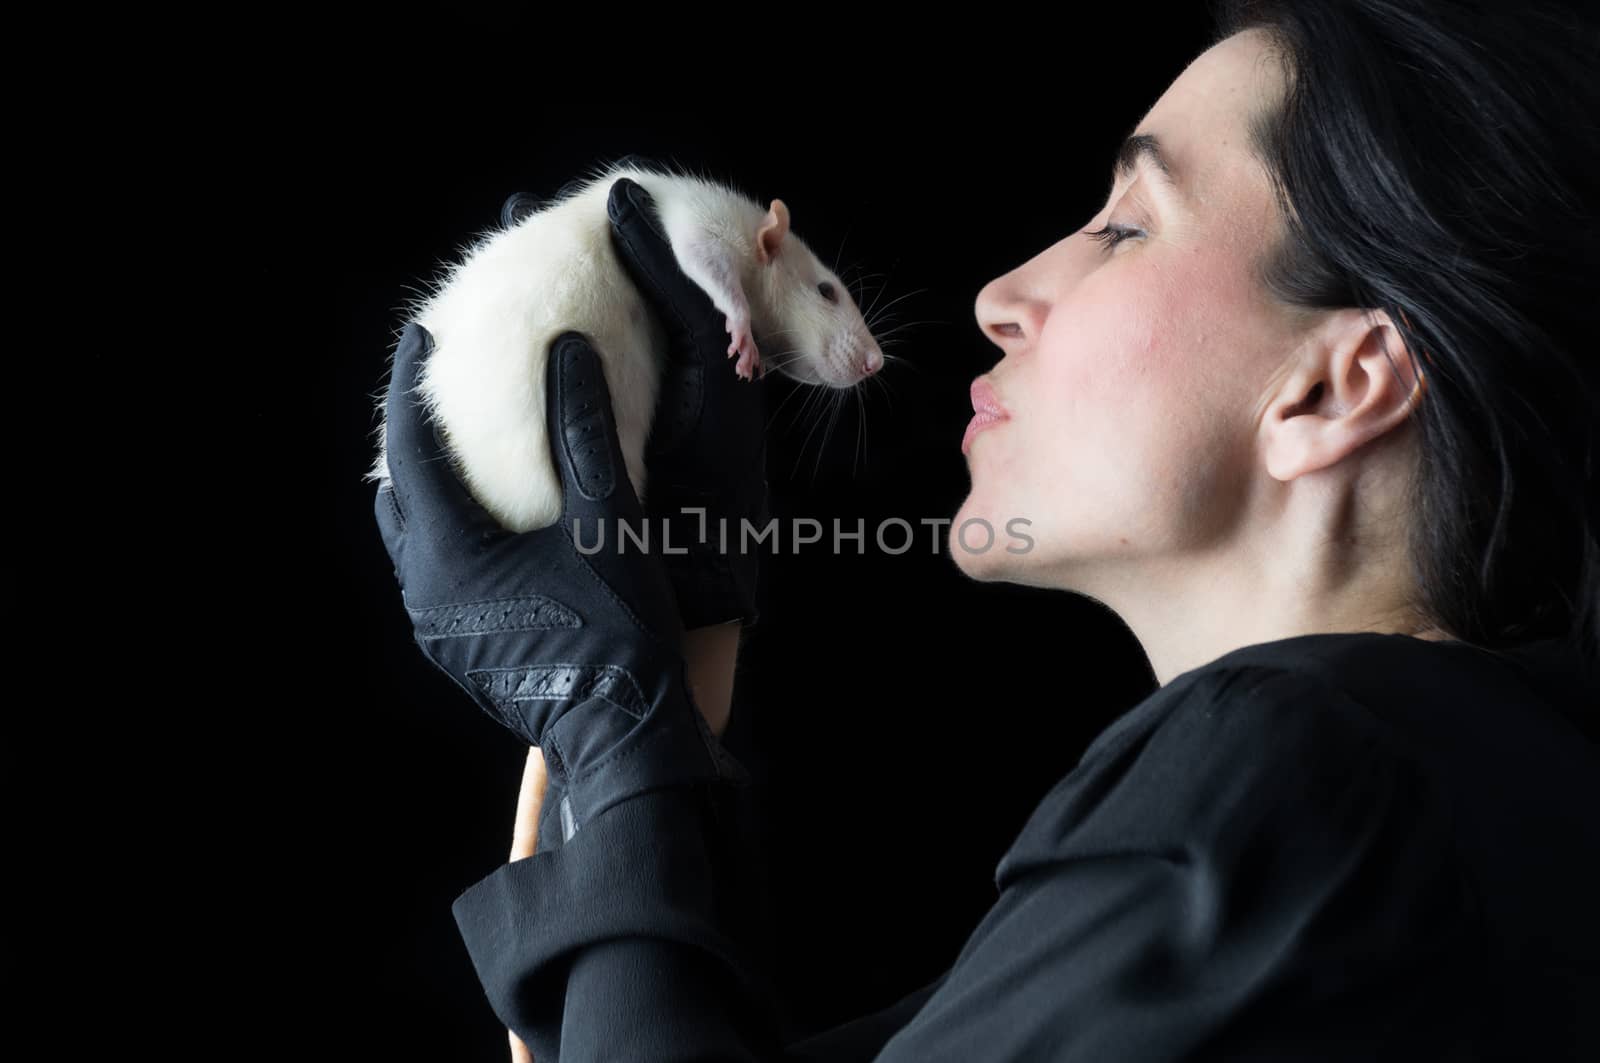 Brunette woman in black standing in front of a black backdrop, holding a white dumbo rat, looking at it with affection and love.